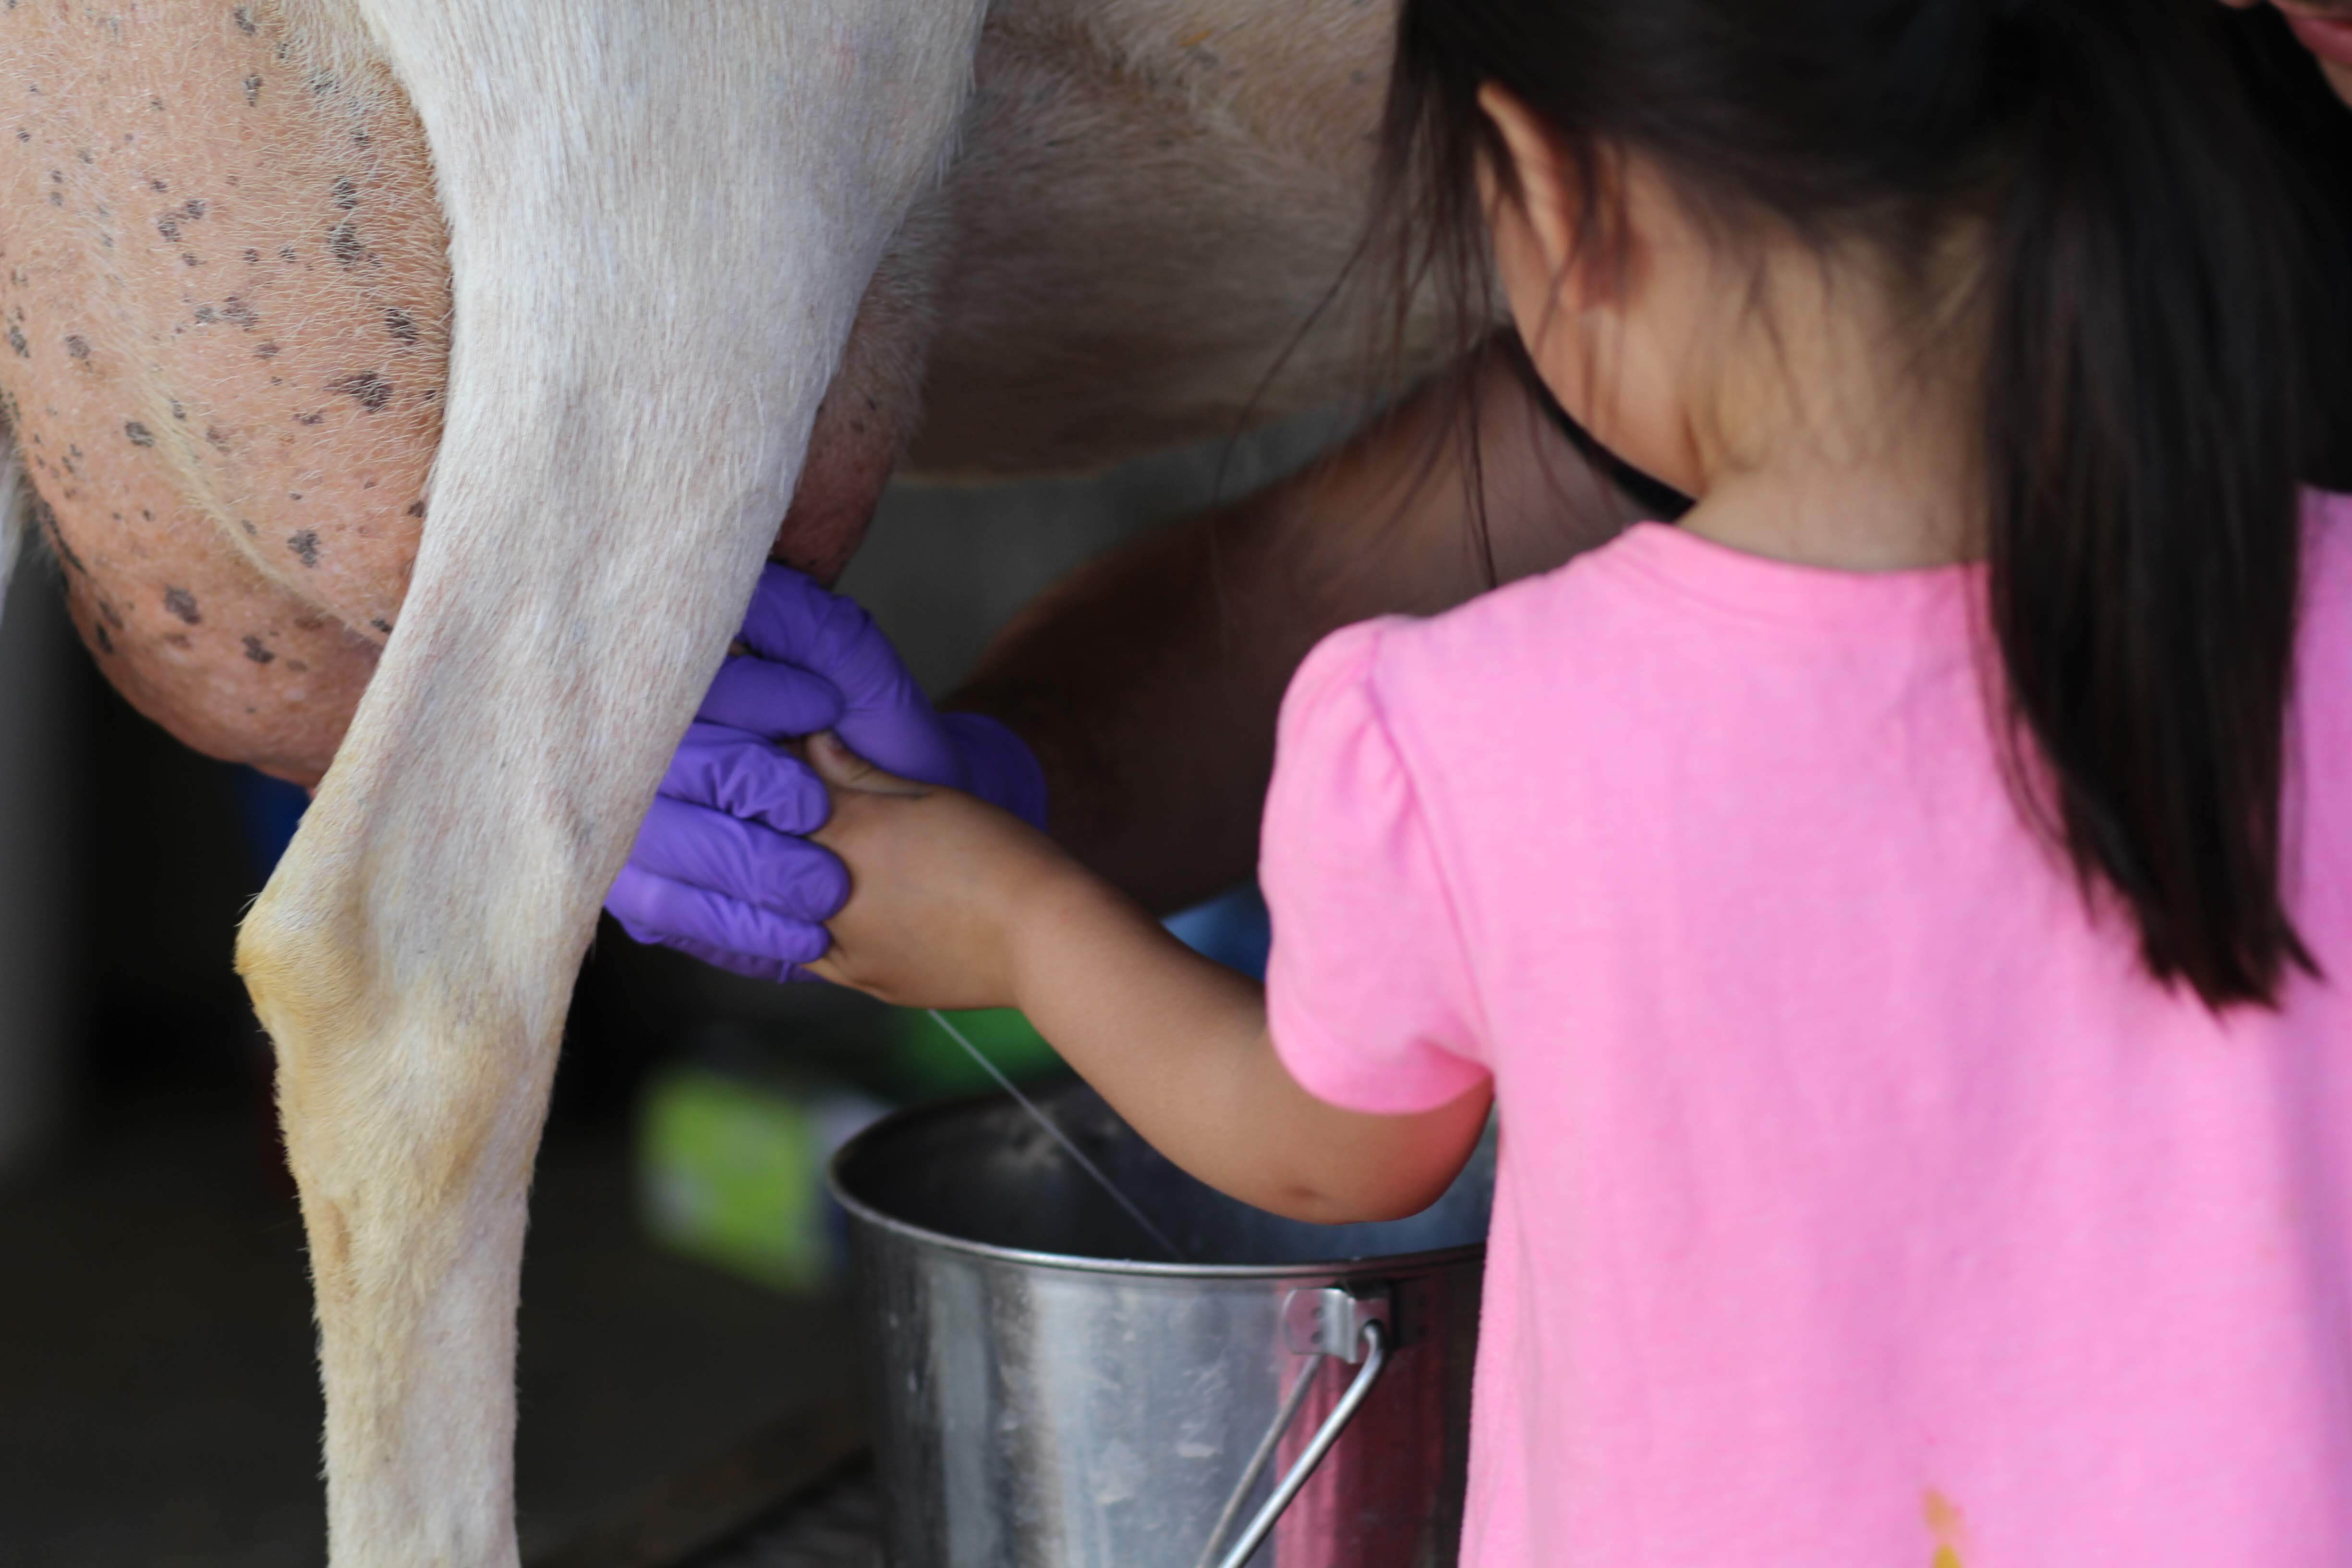 A girl milks a cow at Picnic Day